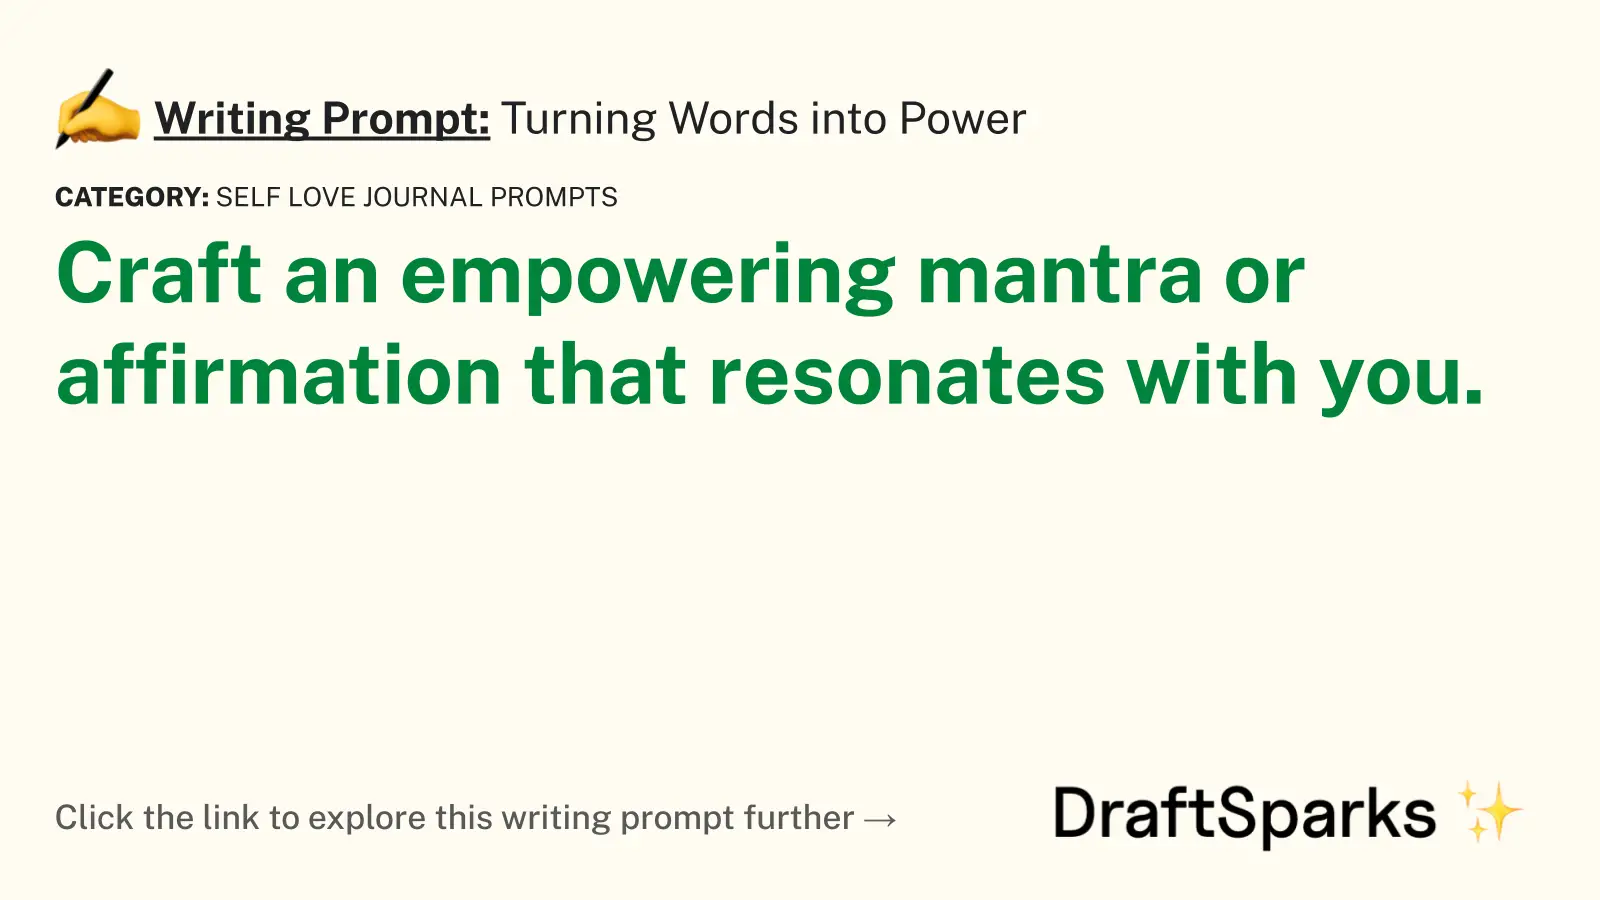 Turning Words into Power